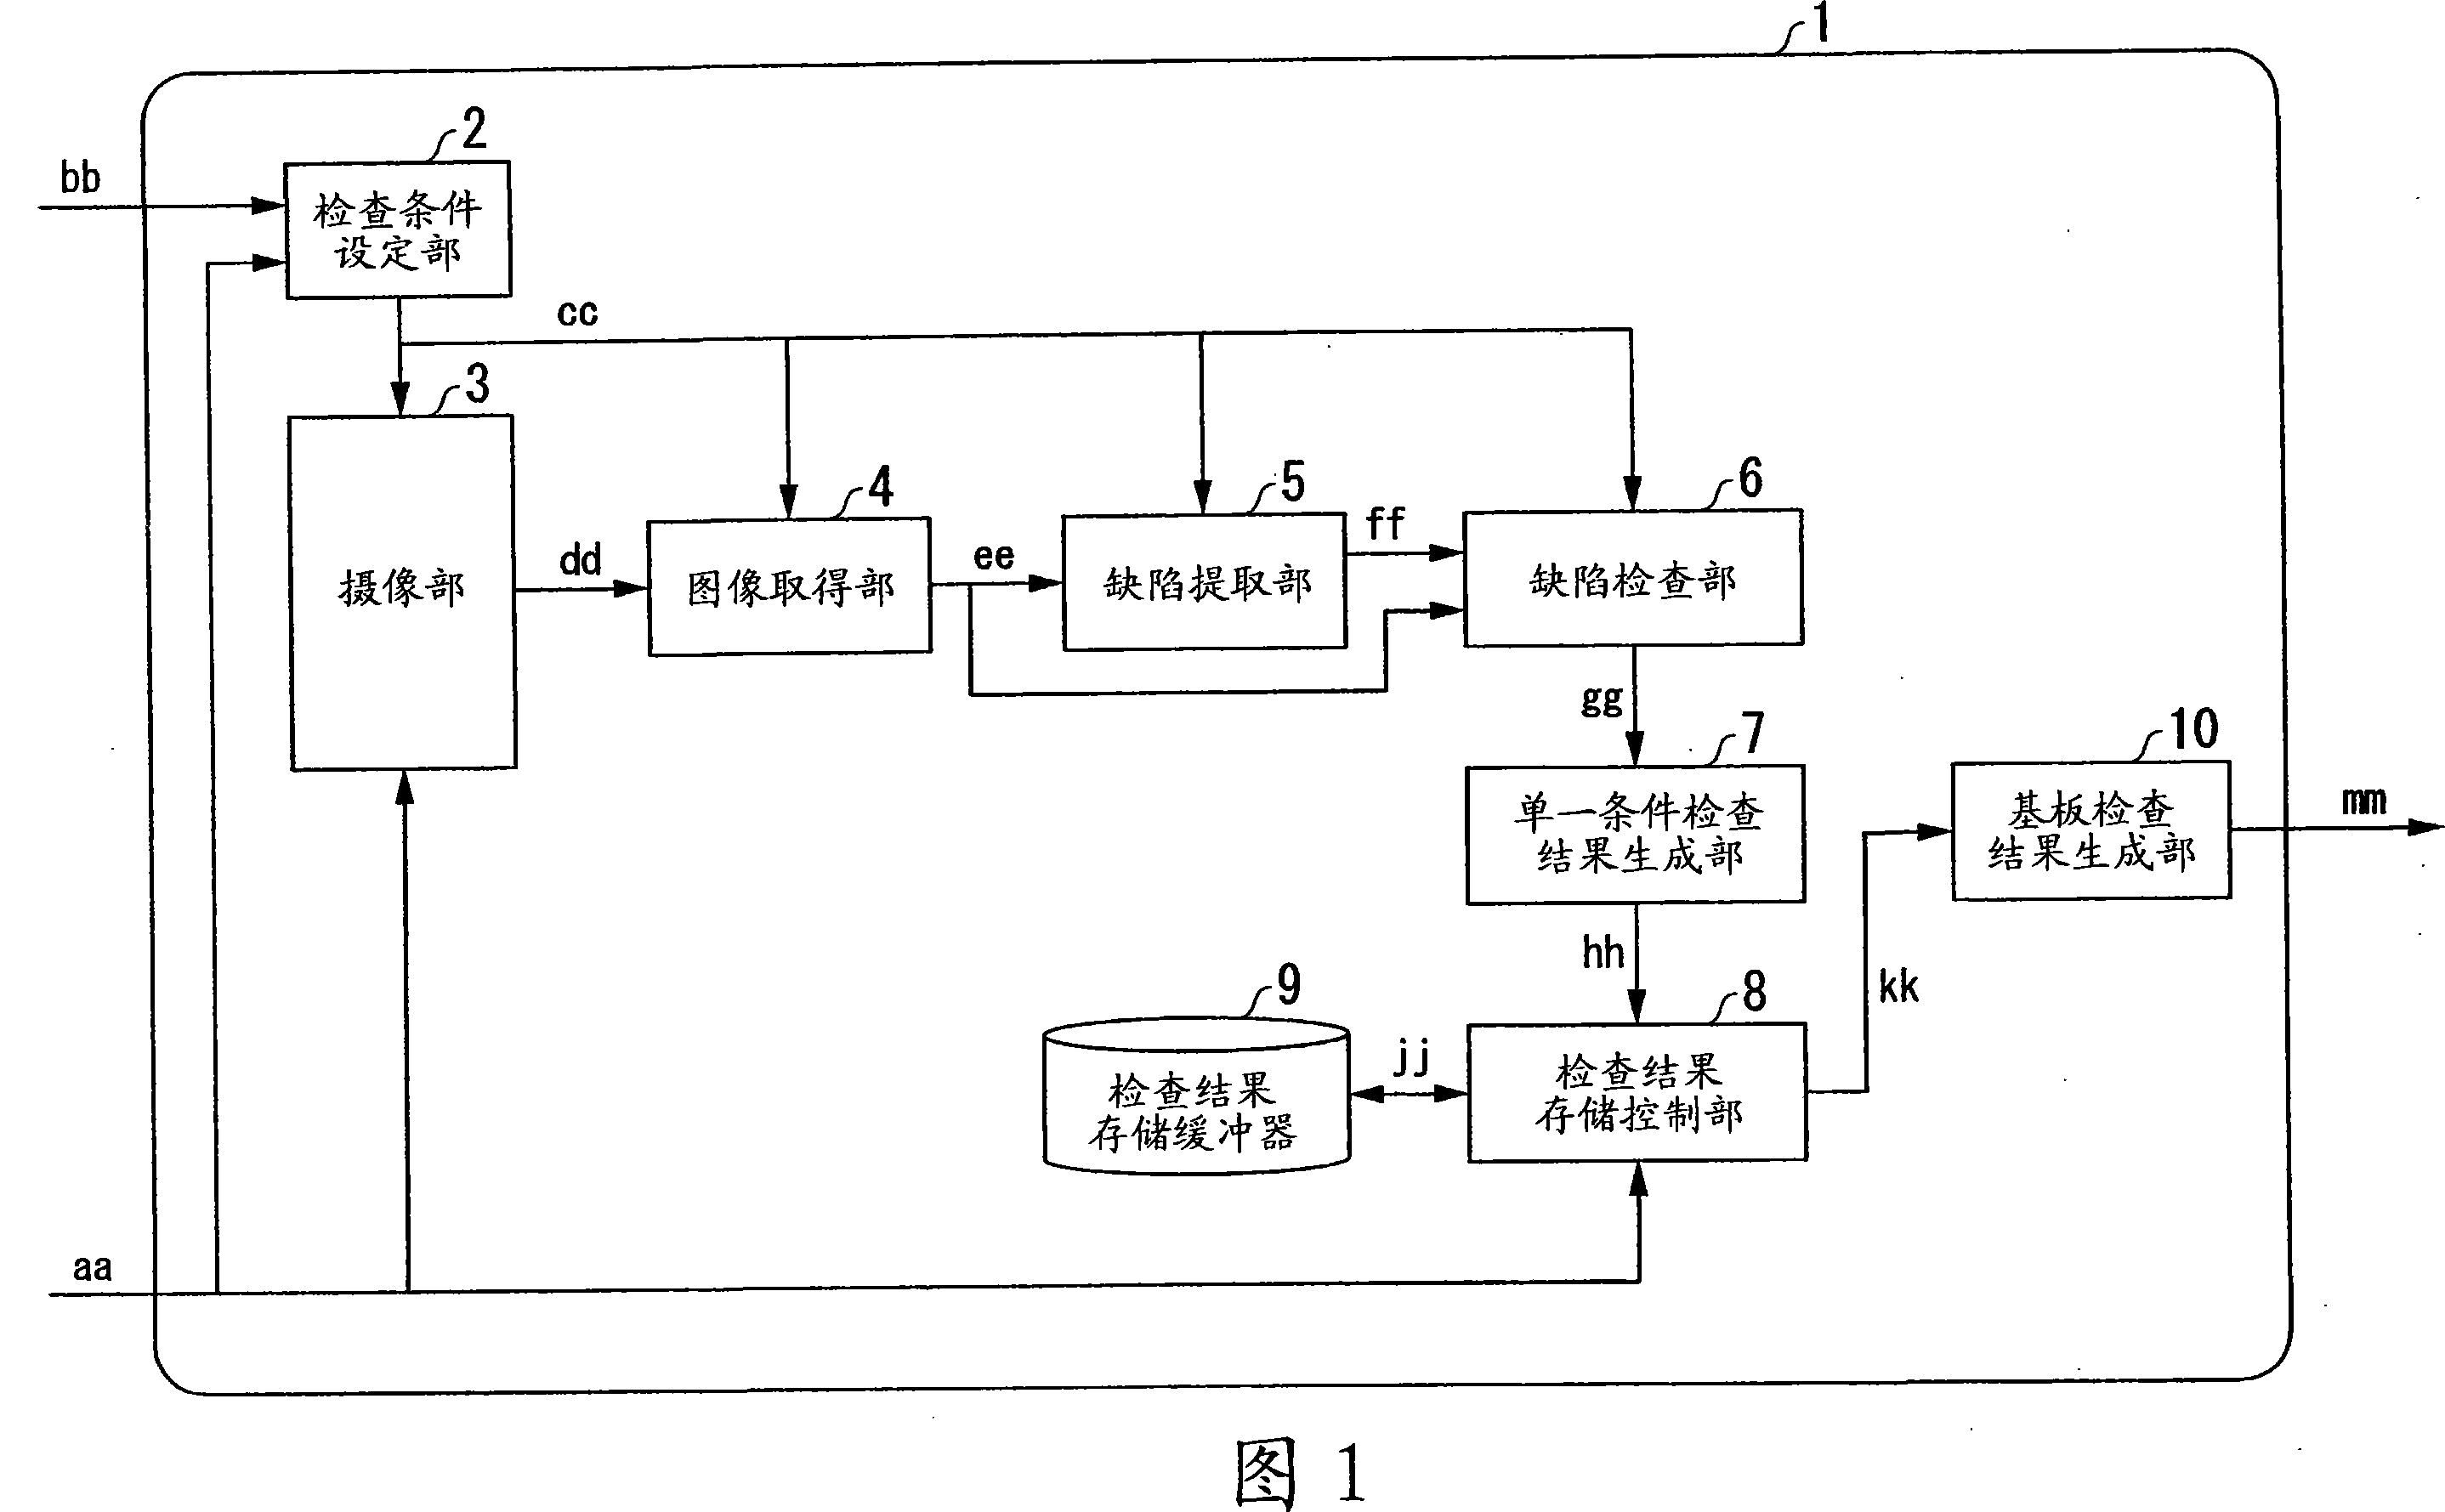 Defect testing device and method